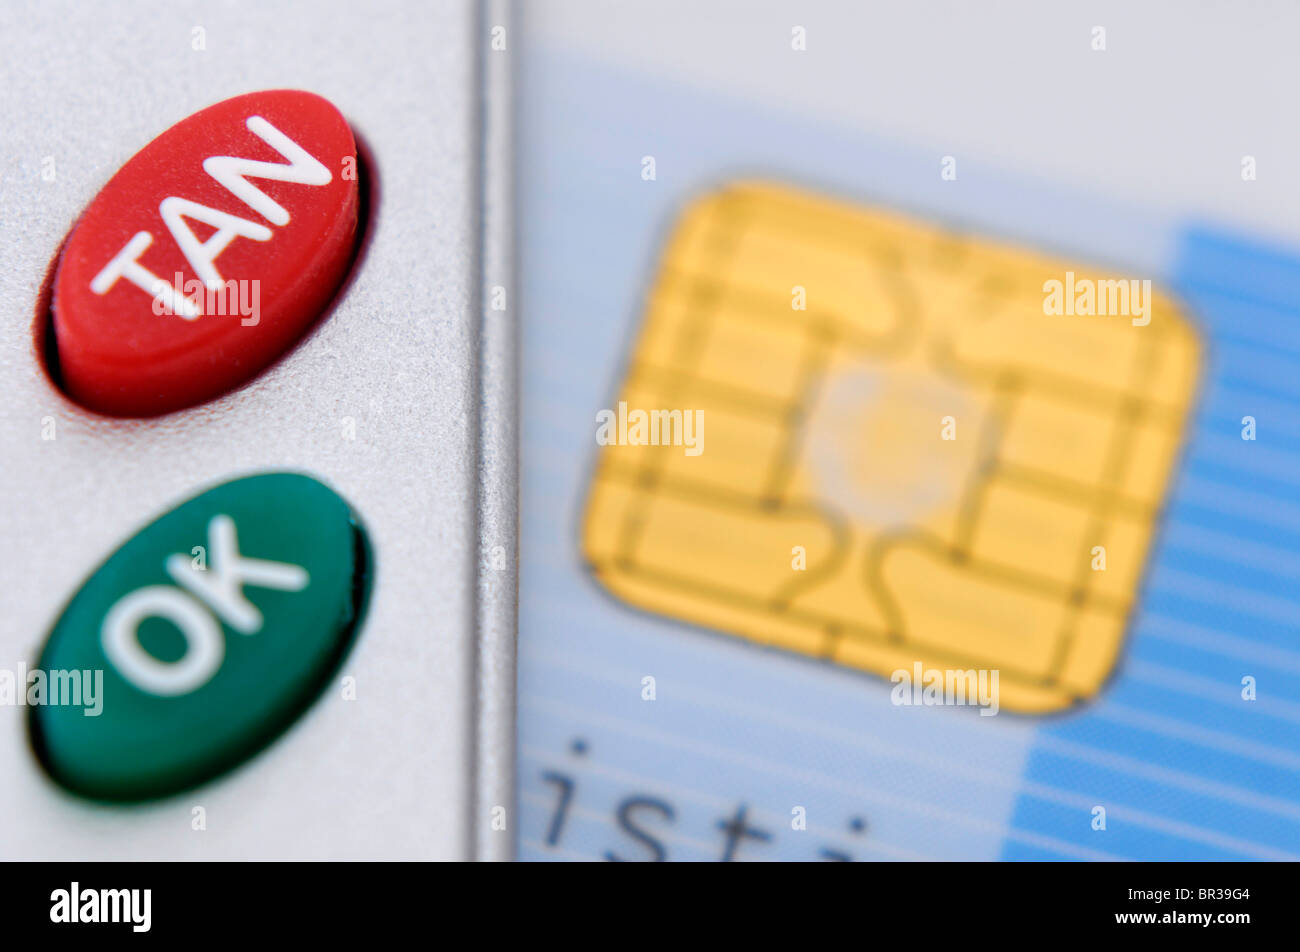 TAN-button on a card reader and a cash card, online banking Stock Photo